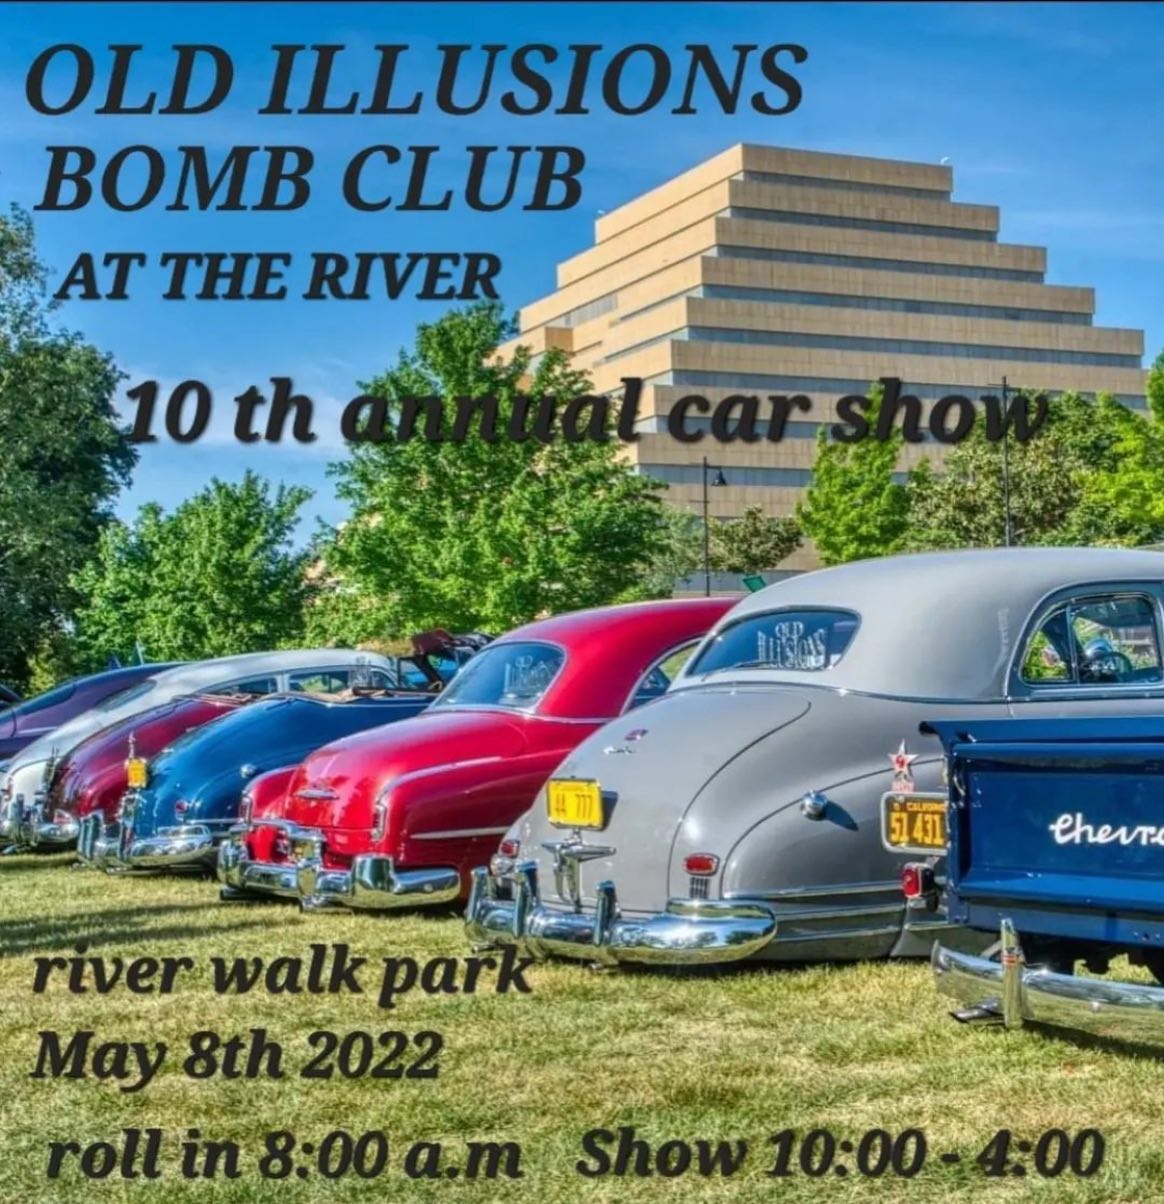 Old Illusions Bomb Club at the River